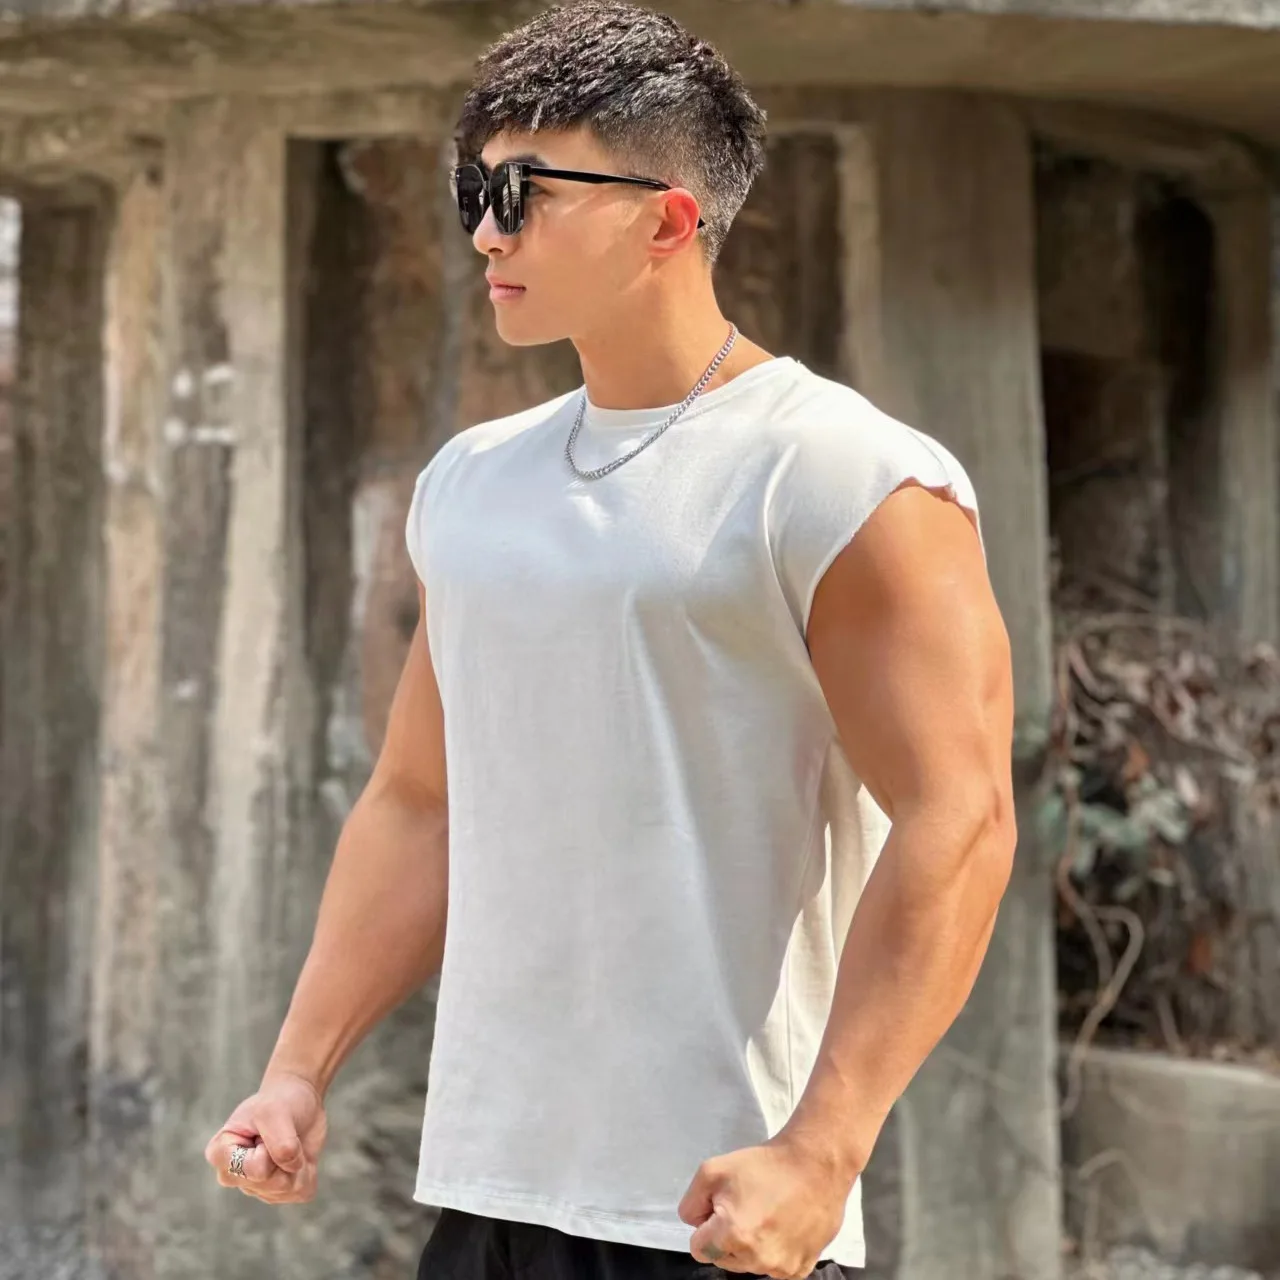 

New Summer Men Pure Color Tank Top Cotton Workout Jogger Sleeveless Shirt Gym Fitness Training Waistcoat Male Vest Casual Top